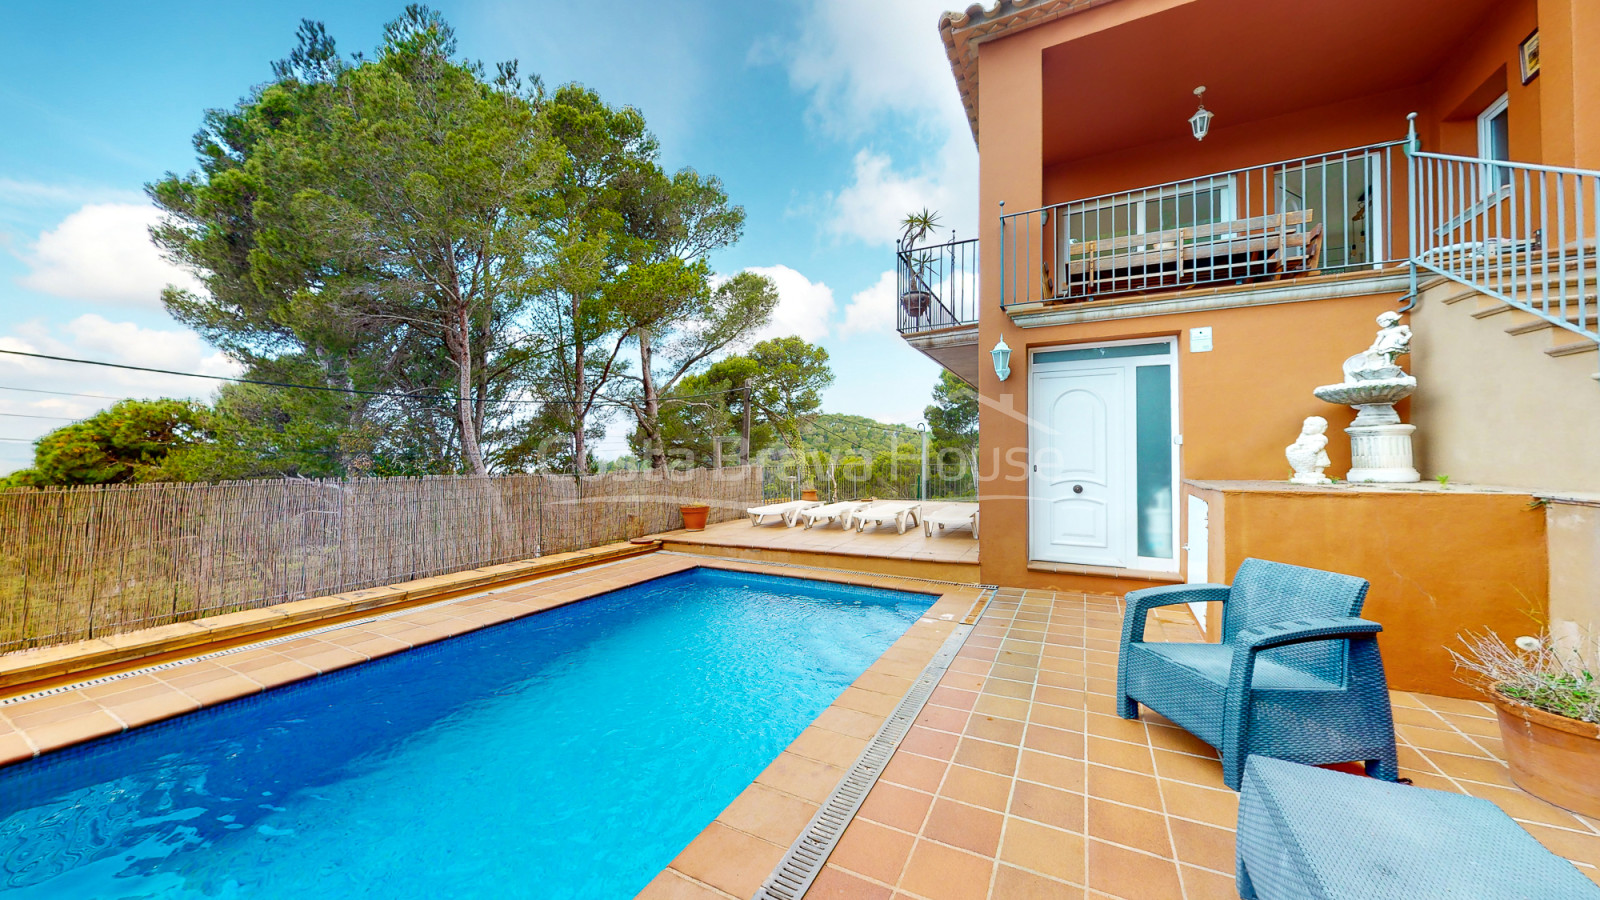 House with pool for sale in Begur Costa Brava